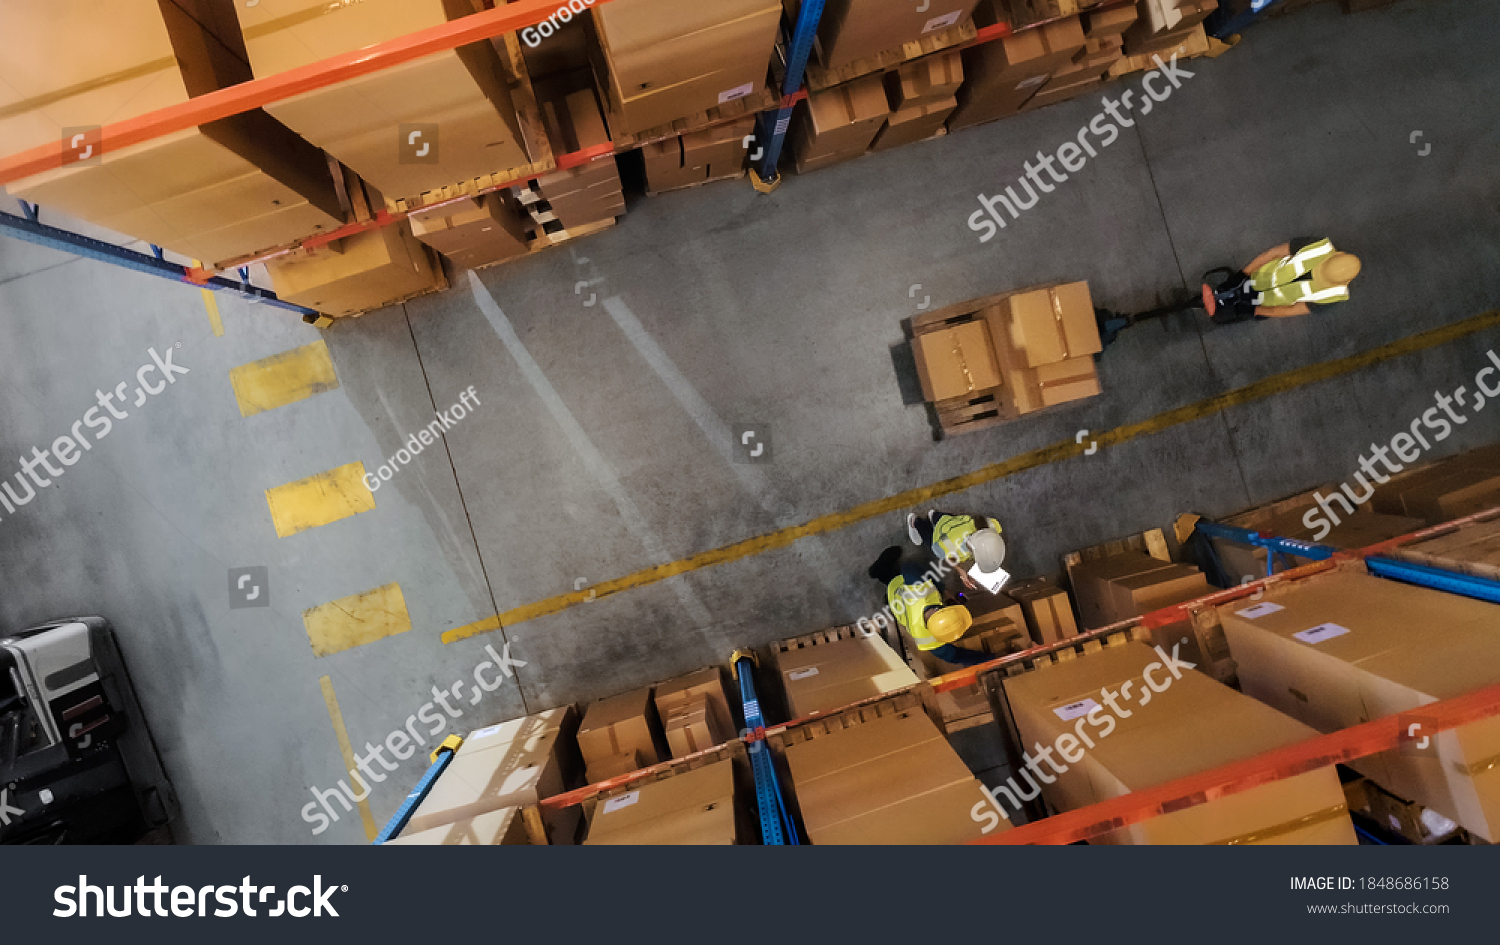 Top-Down View: Worker Moves Cardboard Boxes using Hand Pallet Truck, Walking between Rows of Shelves with Goods in Retail Warehouse. People Work in Product Distribution Logistics Center #1848686158